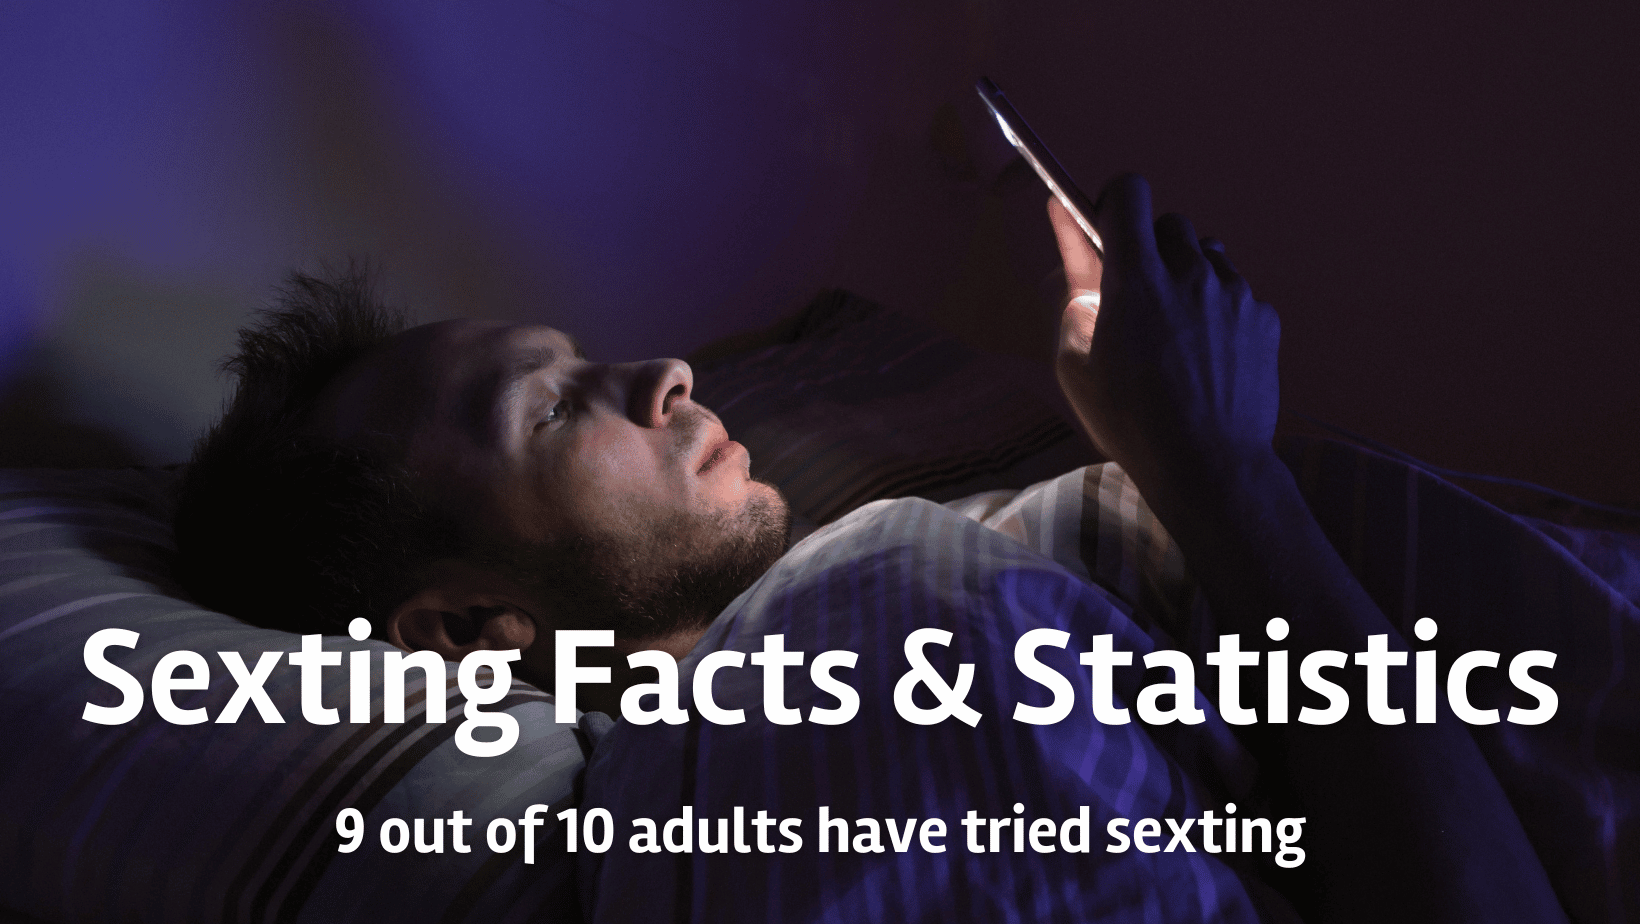 How Common is Sexting? [Facts & Statistics]